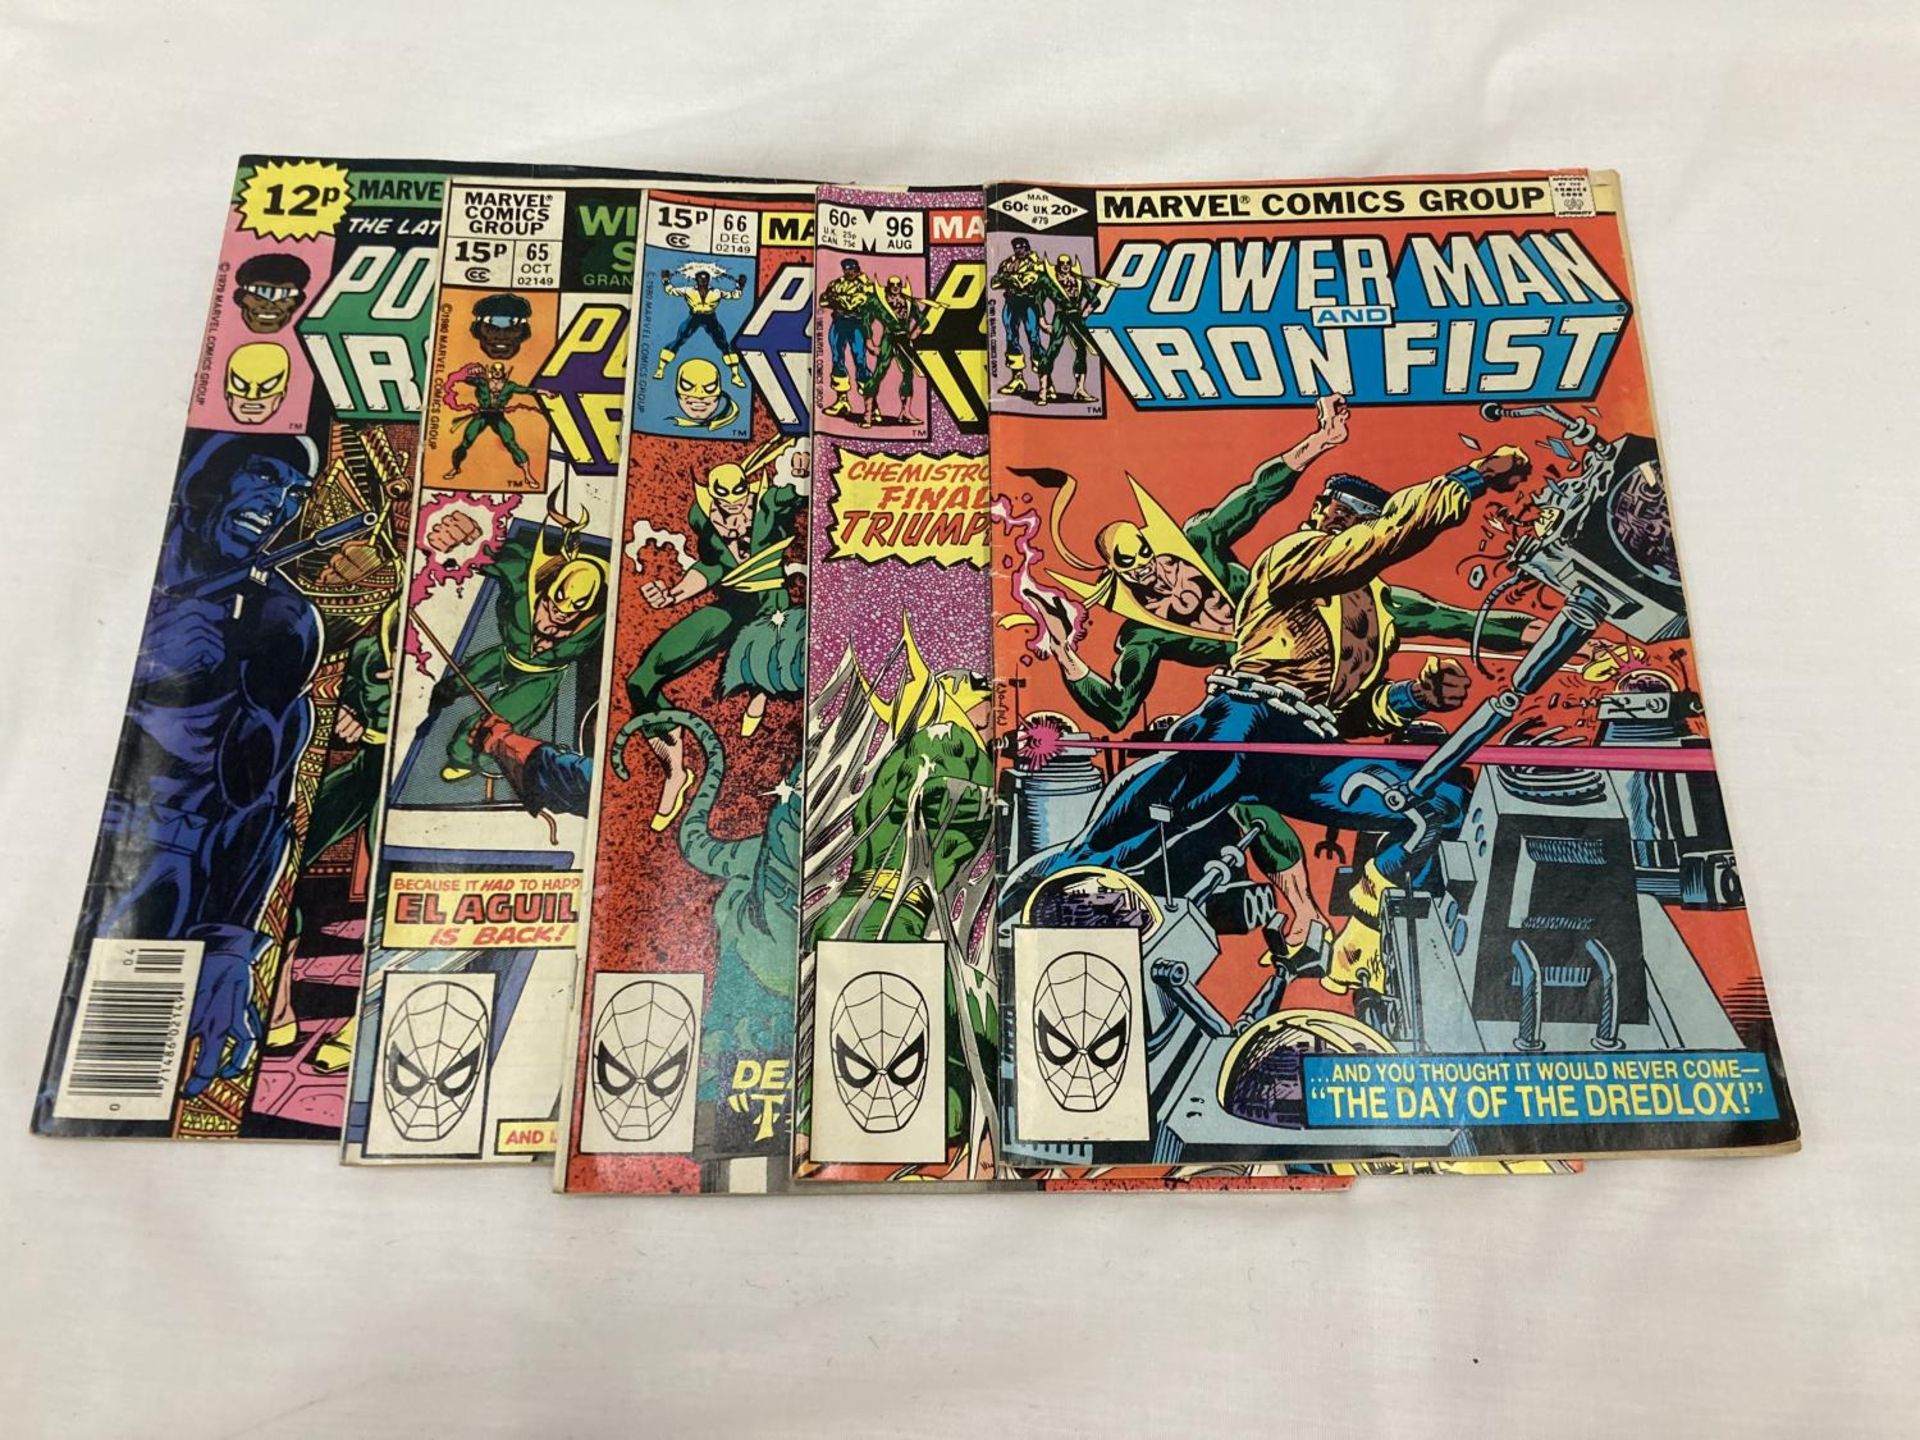 FIVE VINTAGE MARVEL POWERMAN AND IRON FISH COMICS FROM THE 1970'S - Image 2 of 14